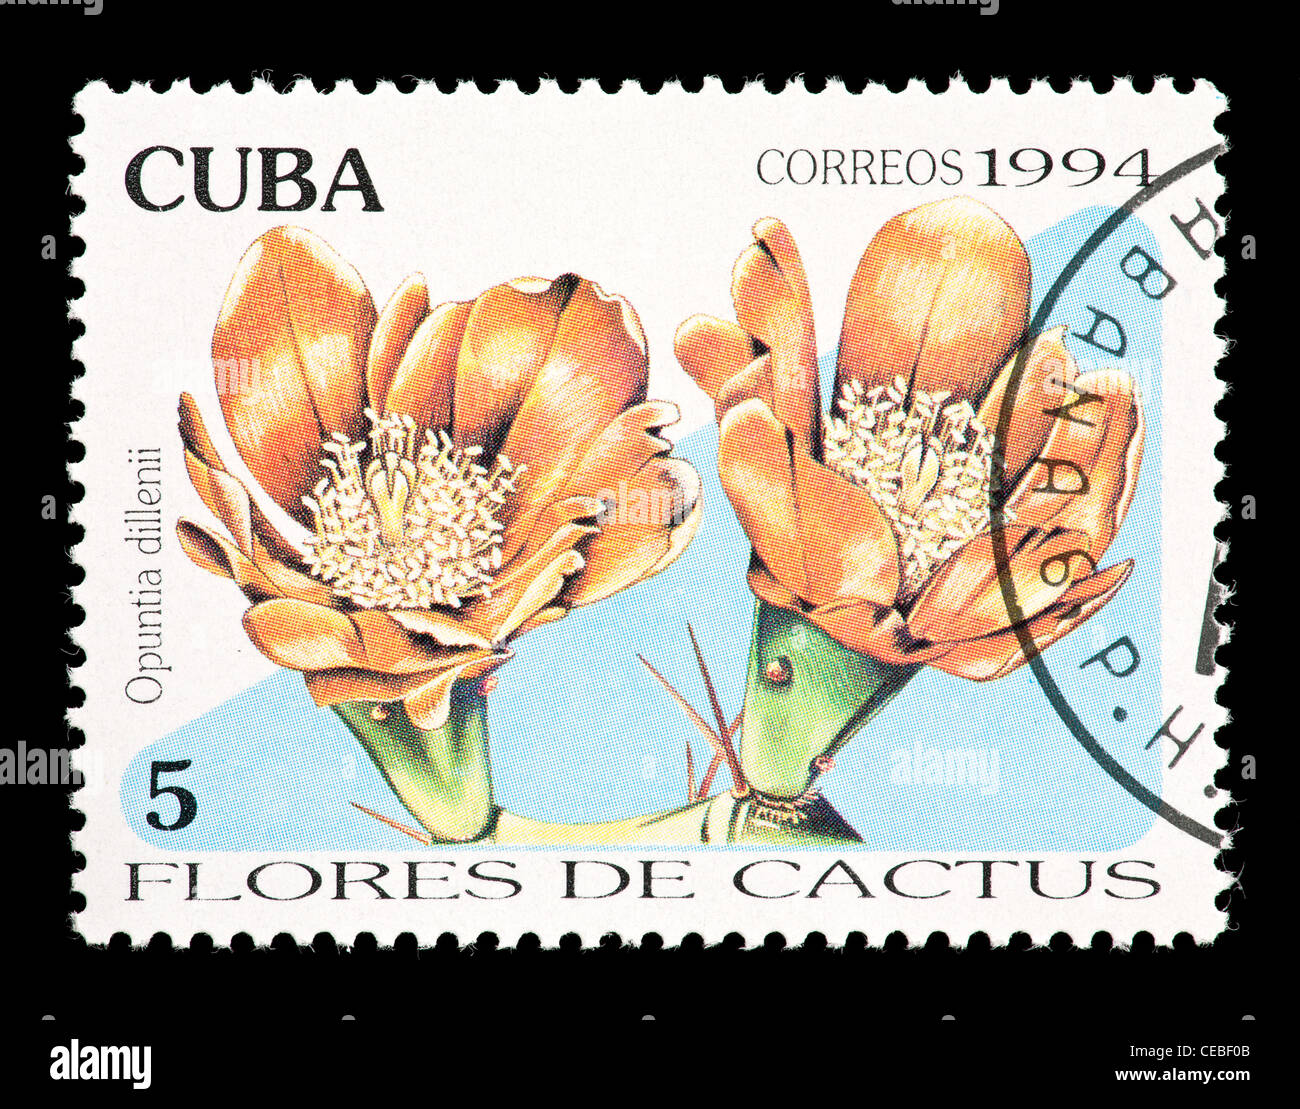 Postage stamp from Cuba depicting a cactus flower (Opuntia dillenii) Stock Photo